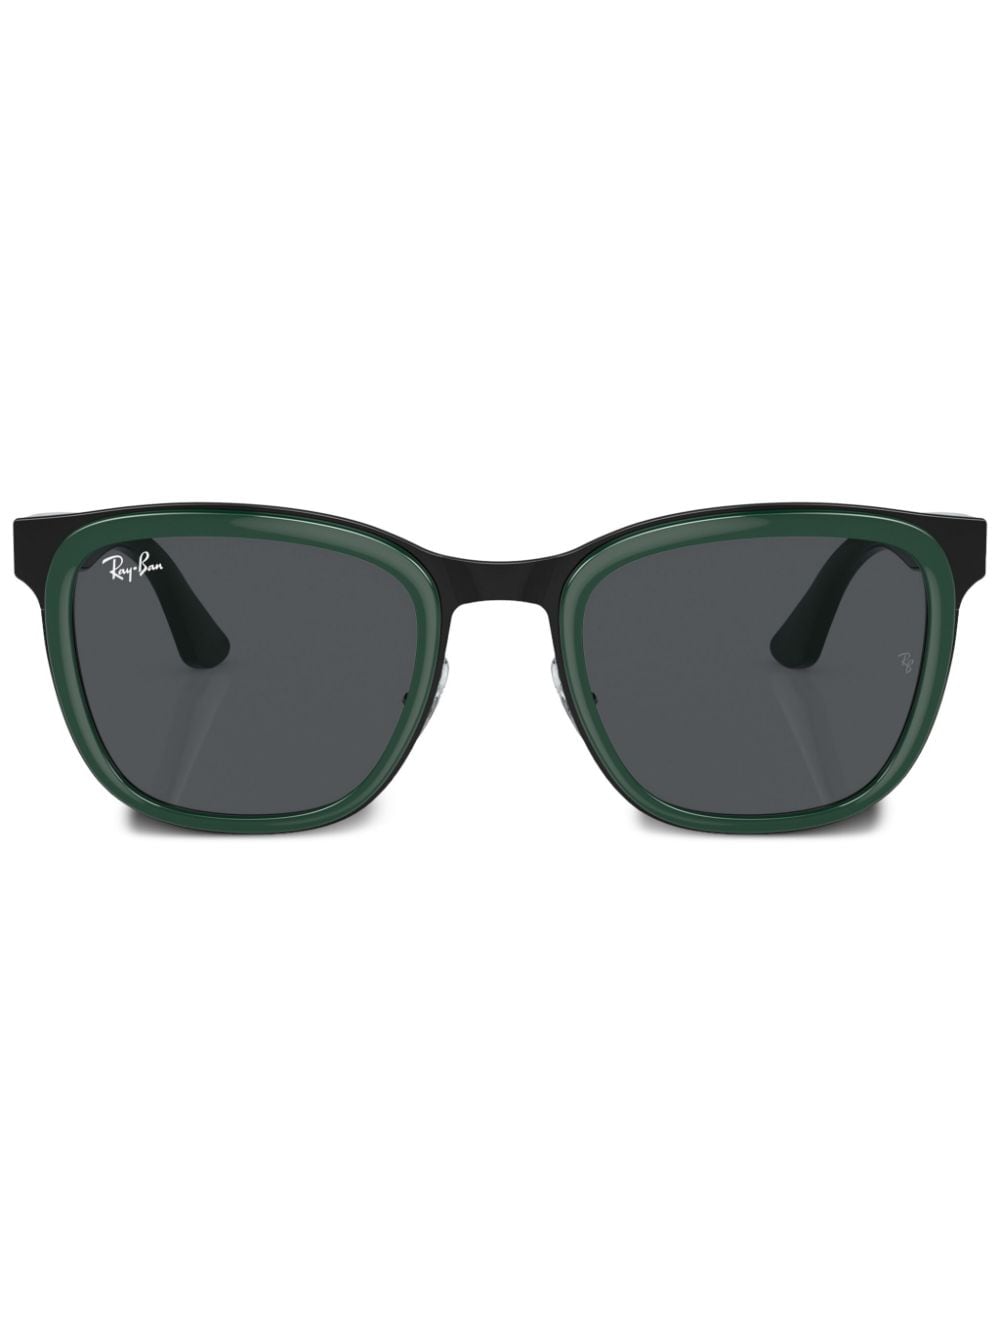 Ray Ban Clyde Round-frame Sunglasses In Green_on_black_dark_grey